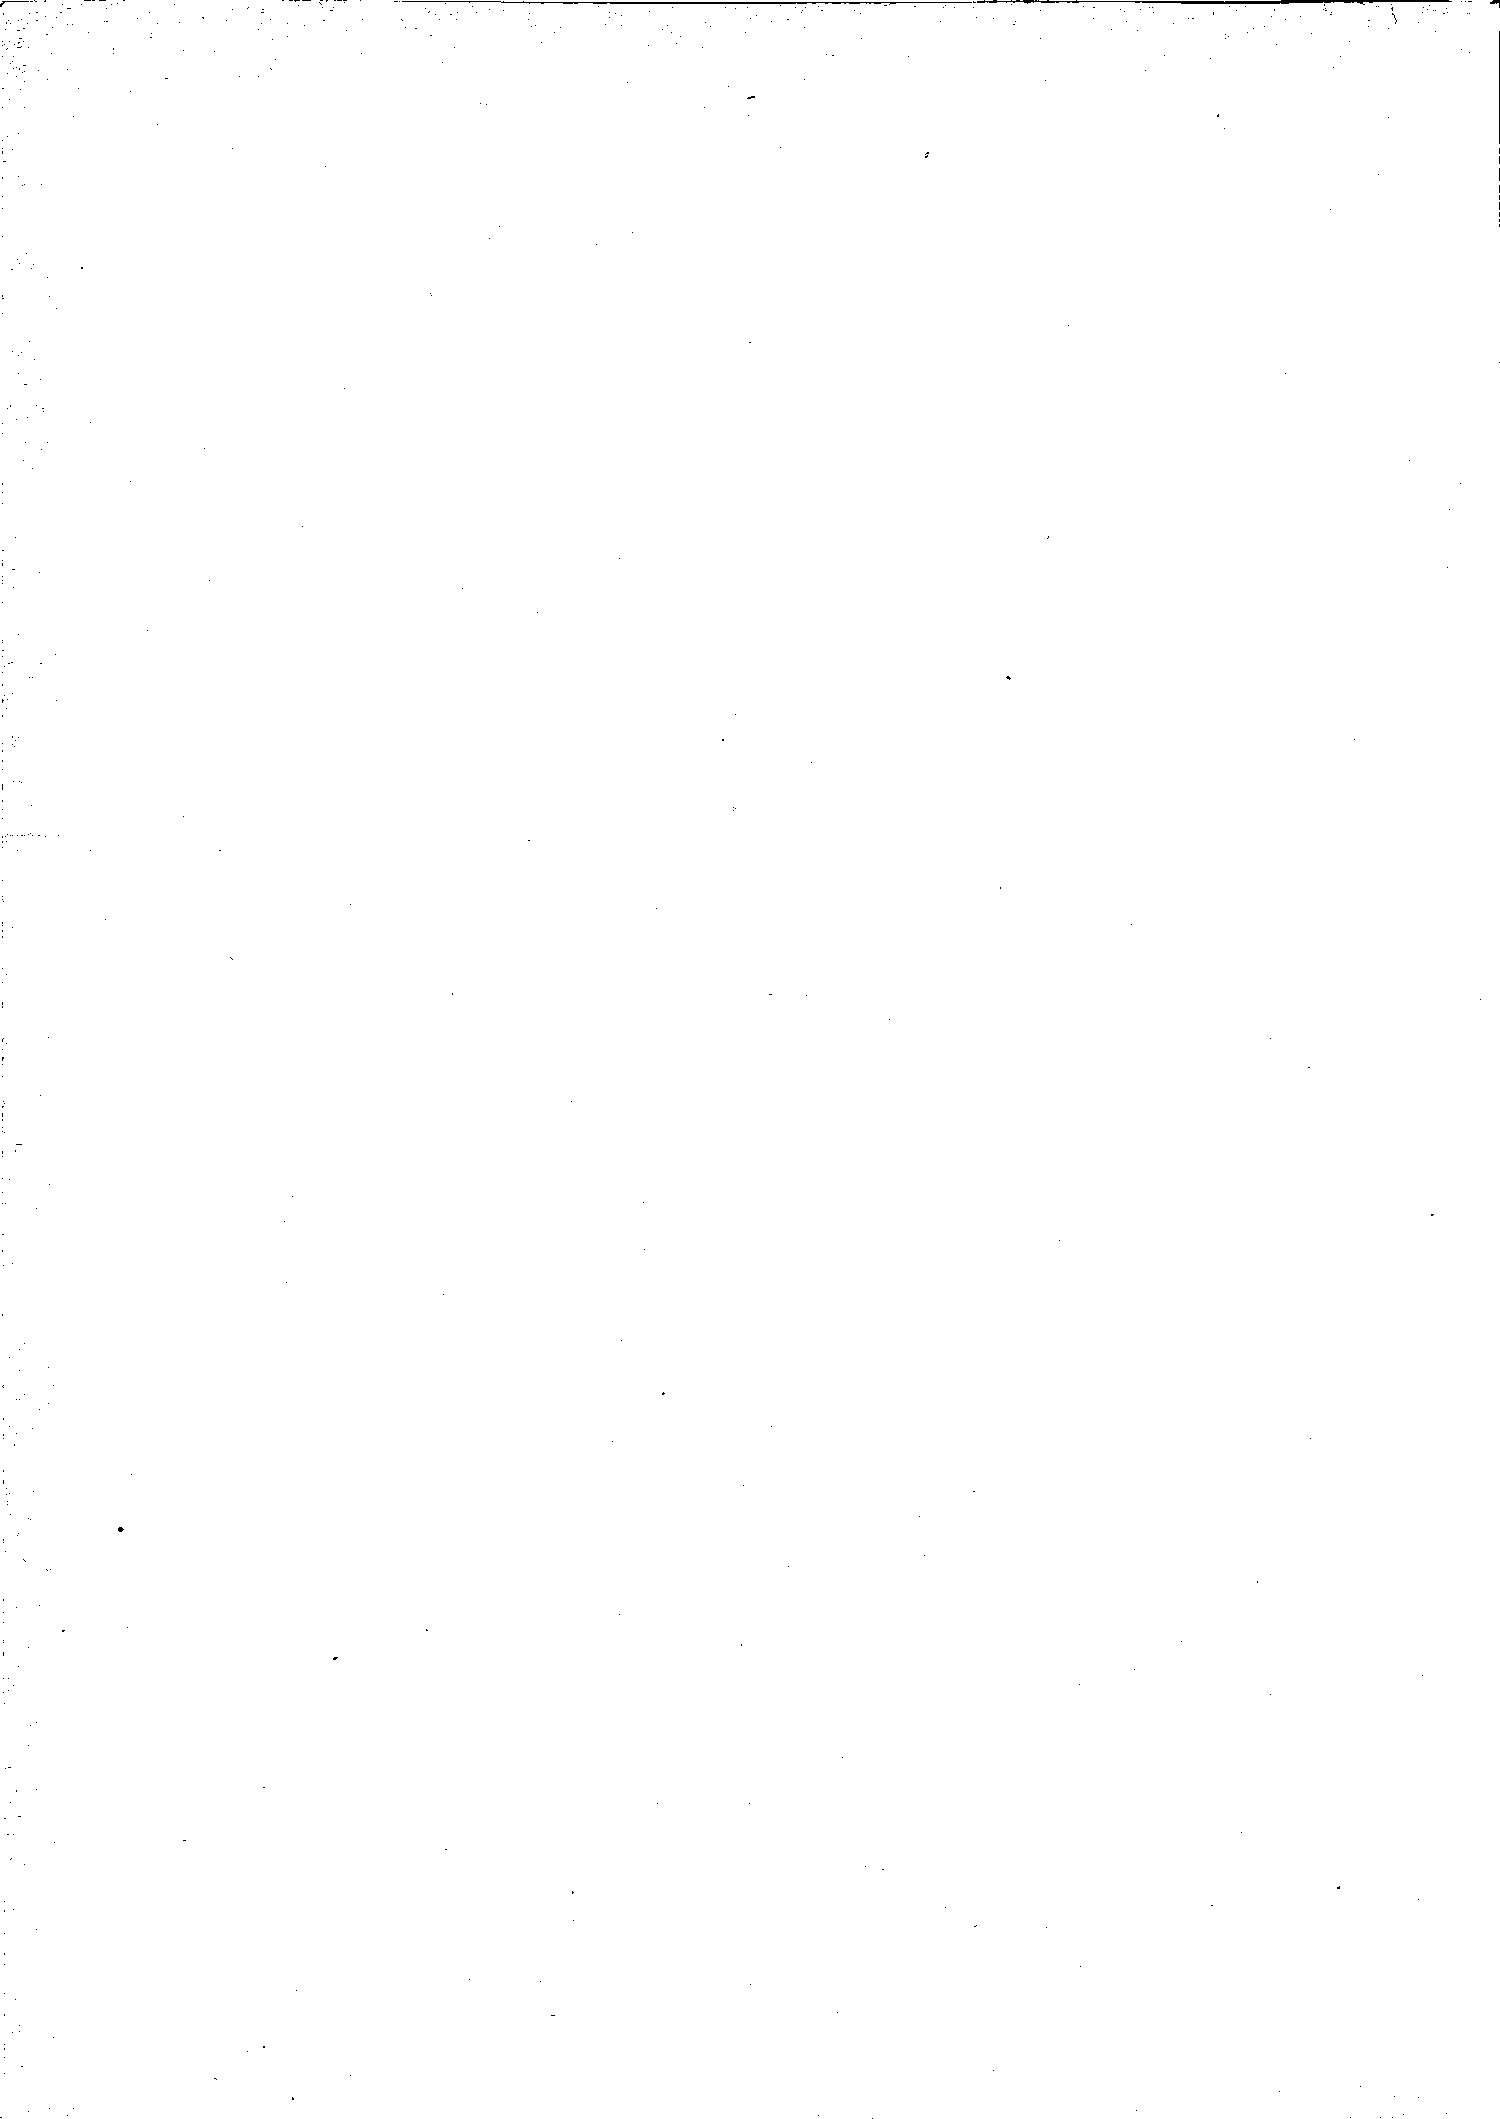 Scan of page 860